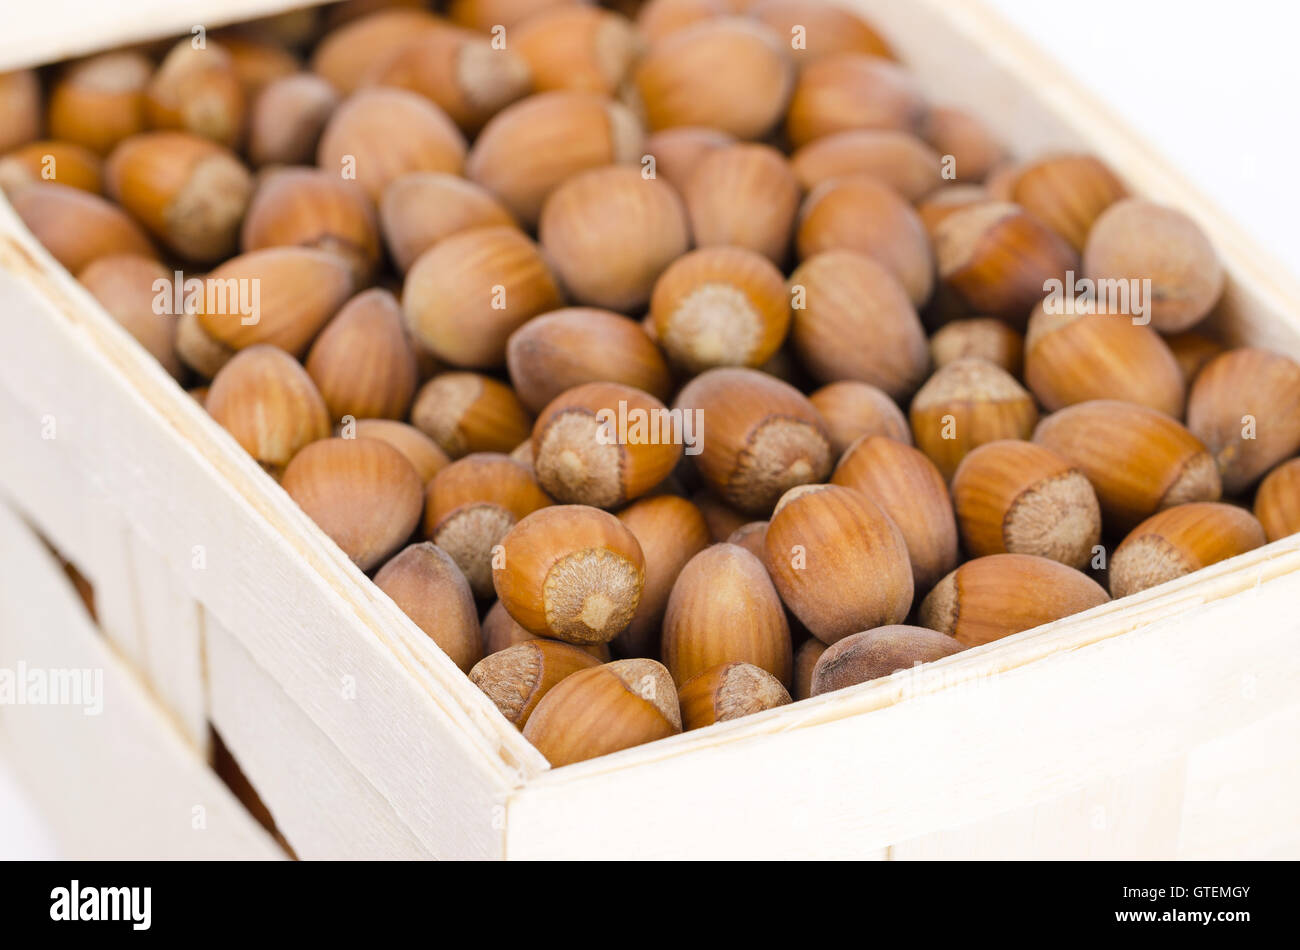 Common hazelnuts in a wicker basket on white background. Unshelled ripe seeds of Corylus avellana, native in Europe. Stock Photo